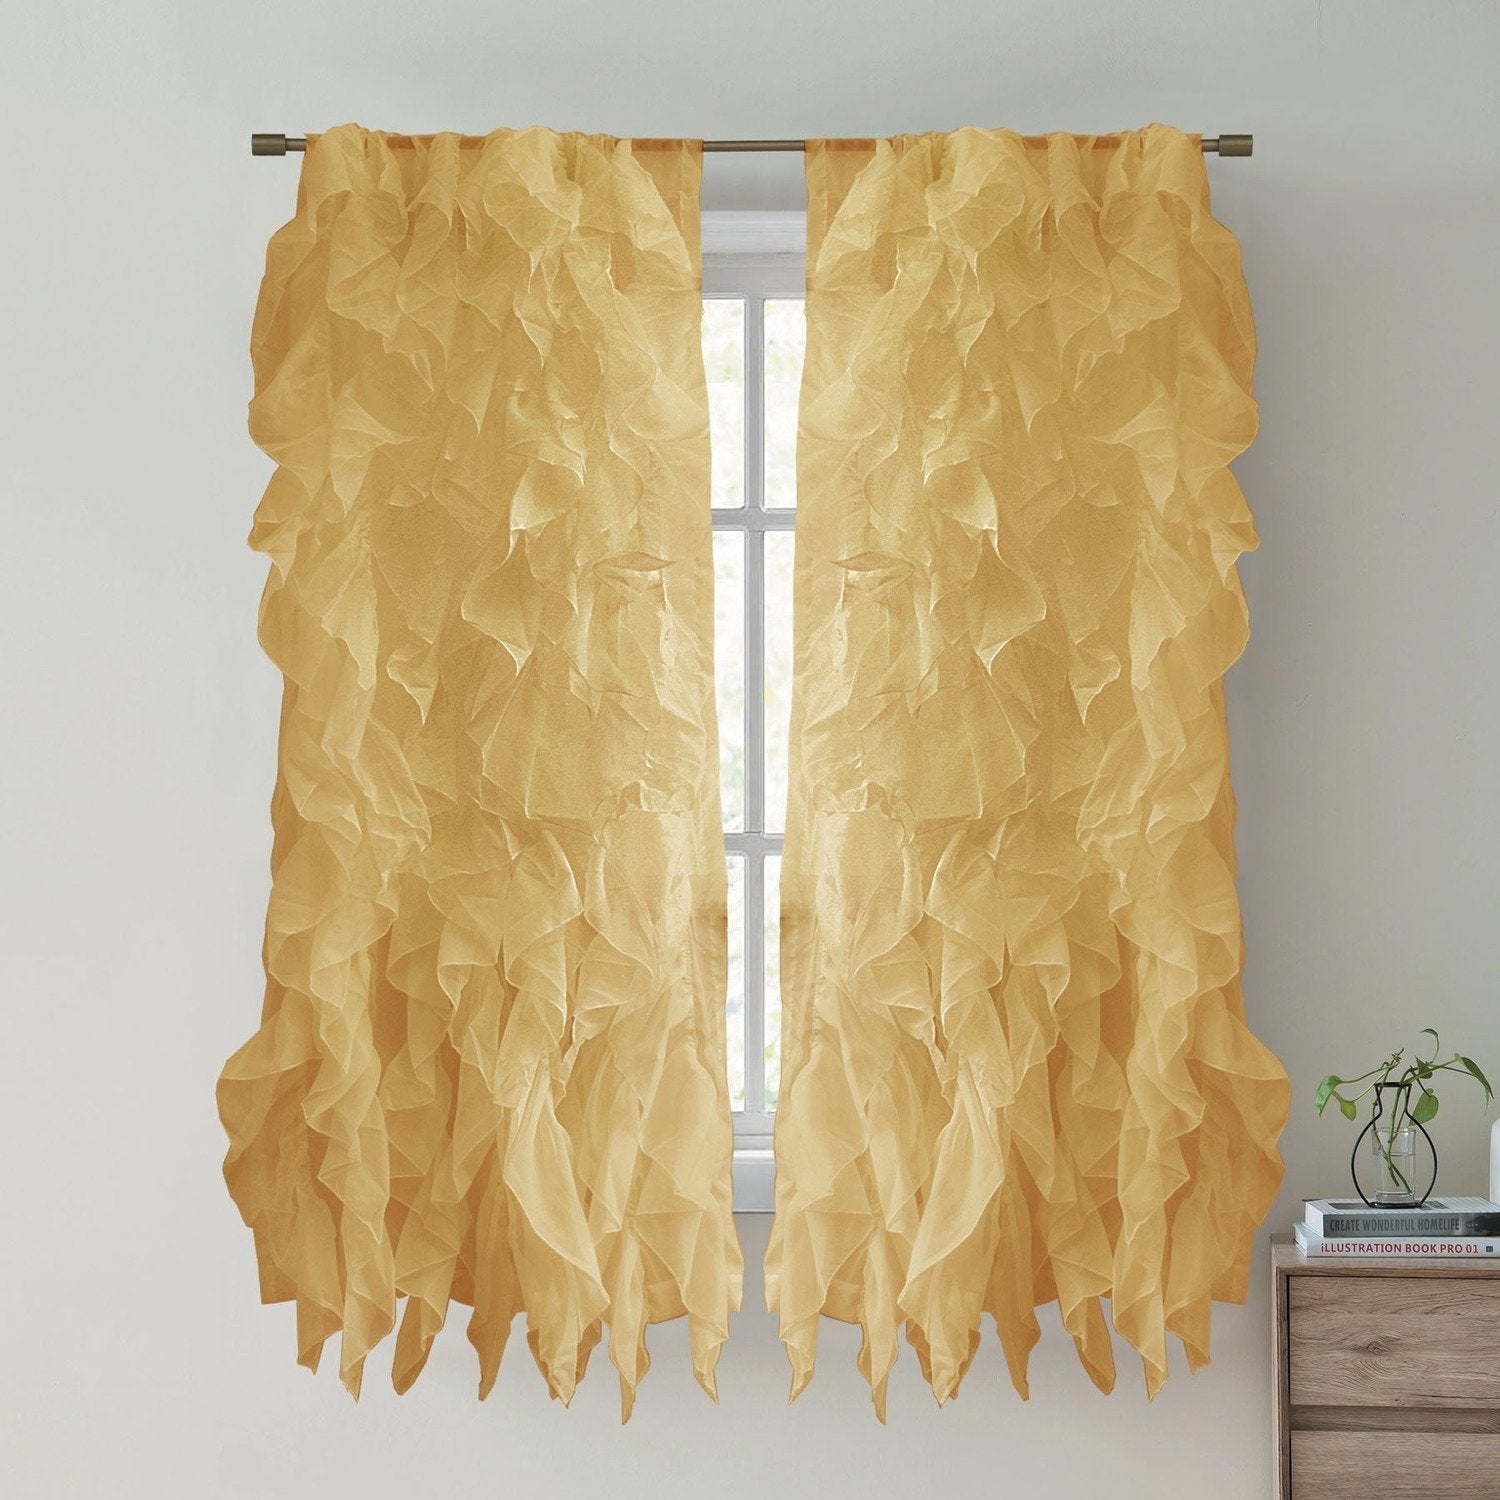 Chic Sheer Voile Ruffled Window Curtain 2-Pack Camel 63X100